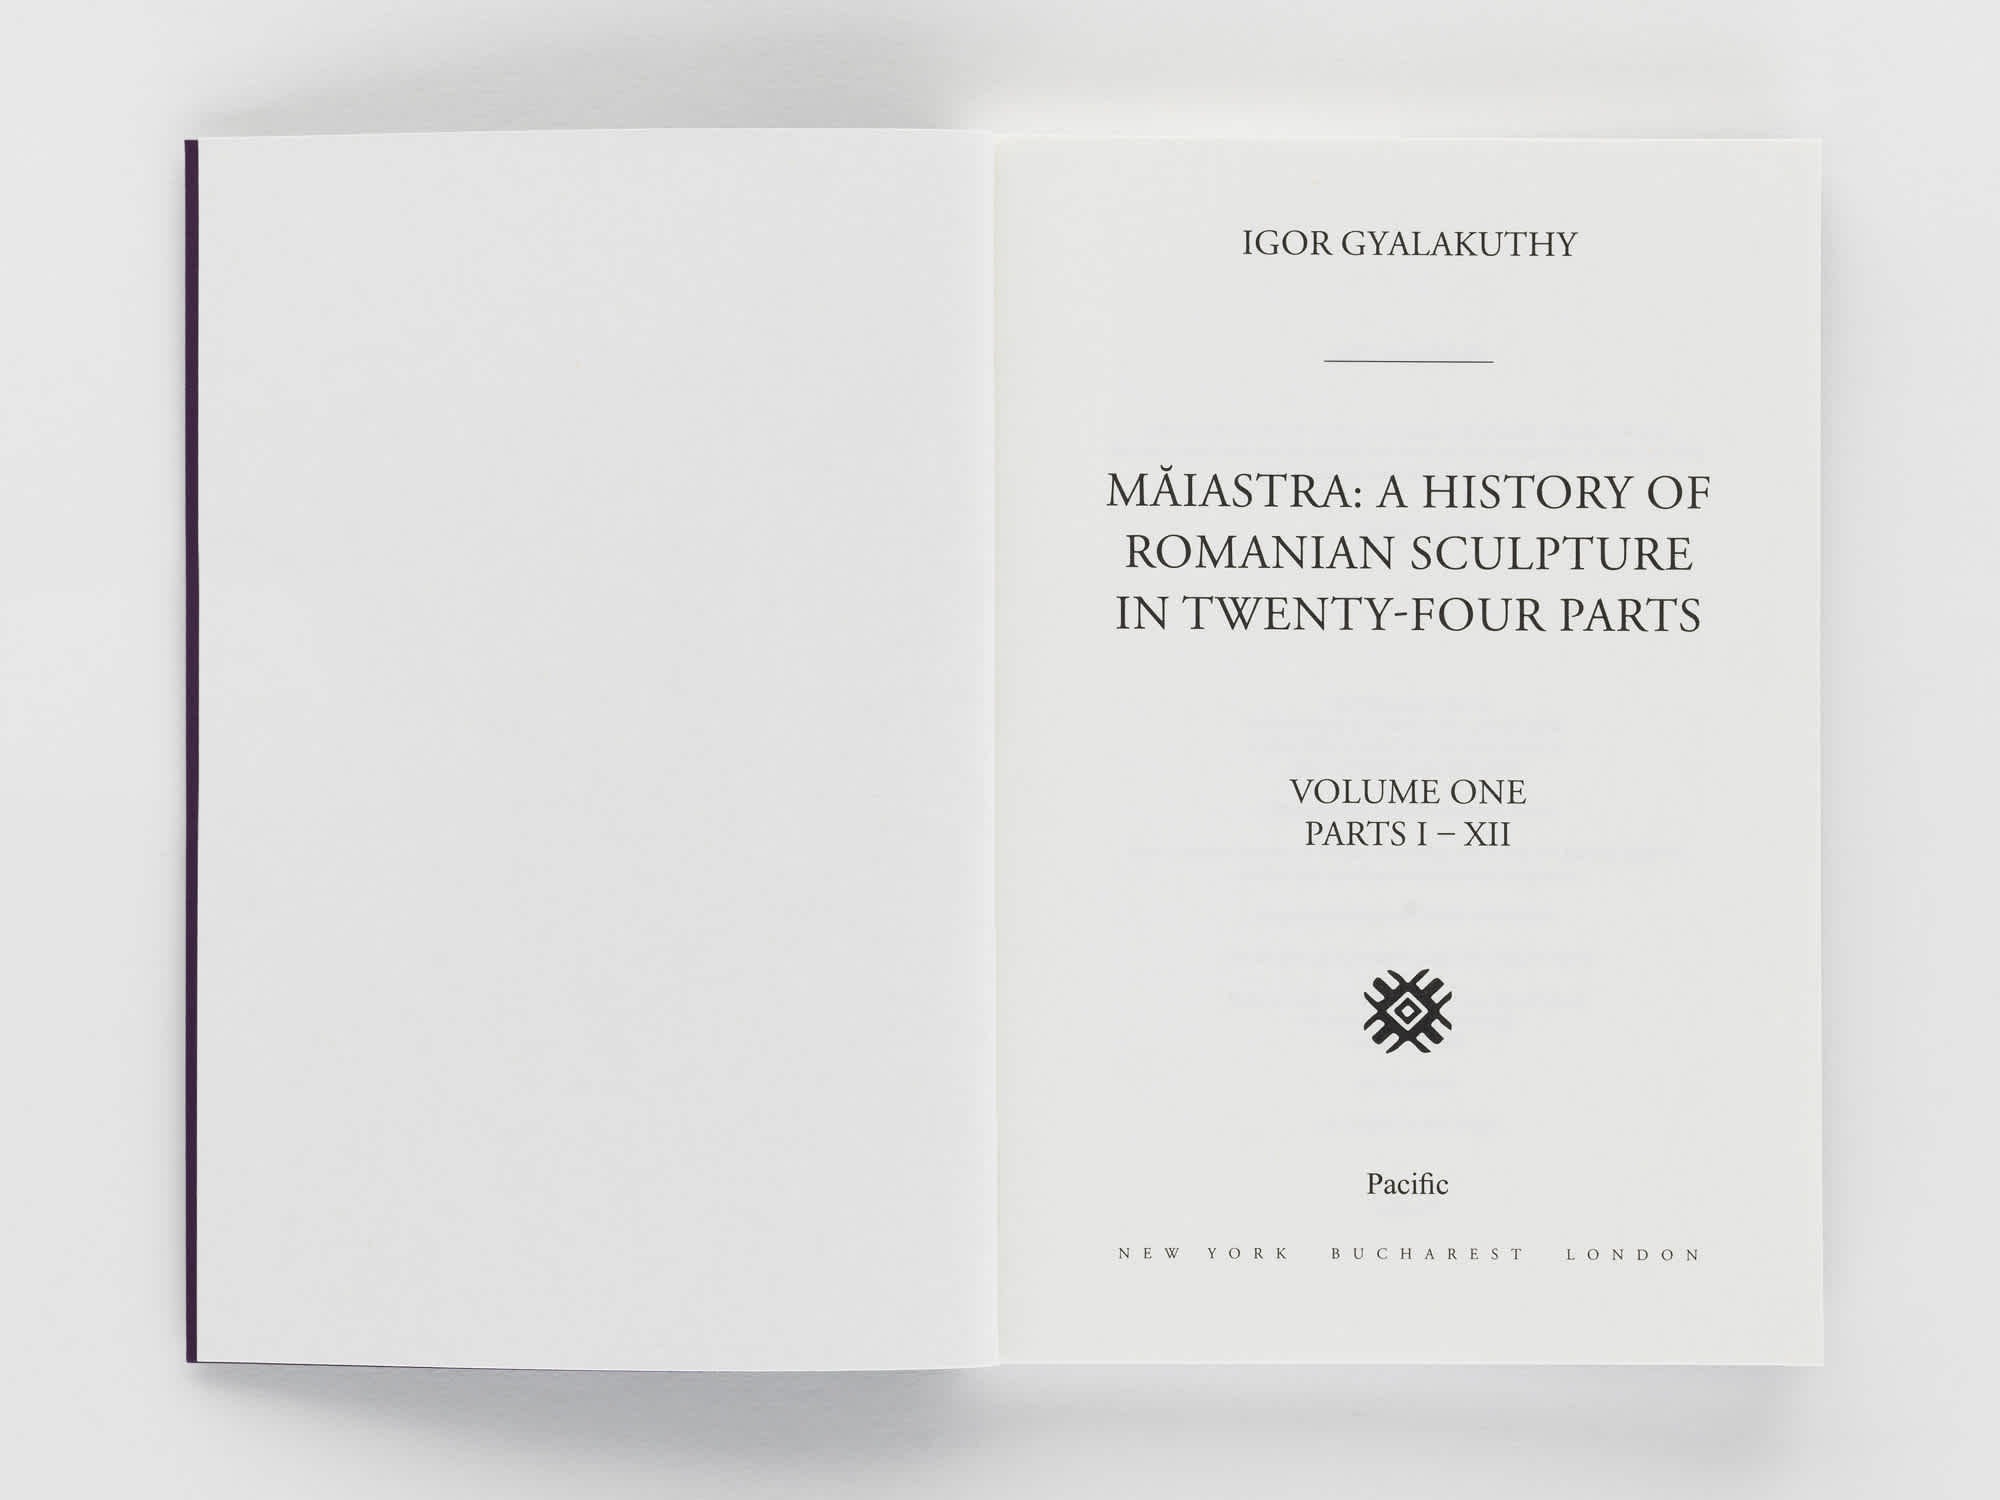 A book open to the title page. The left page is blank.